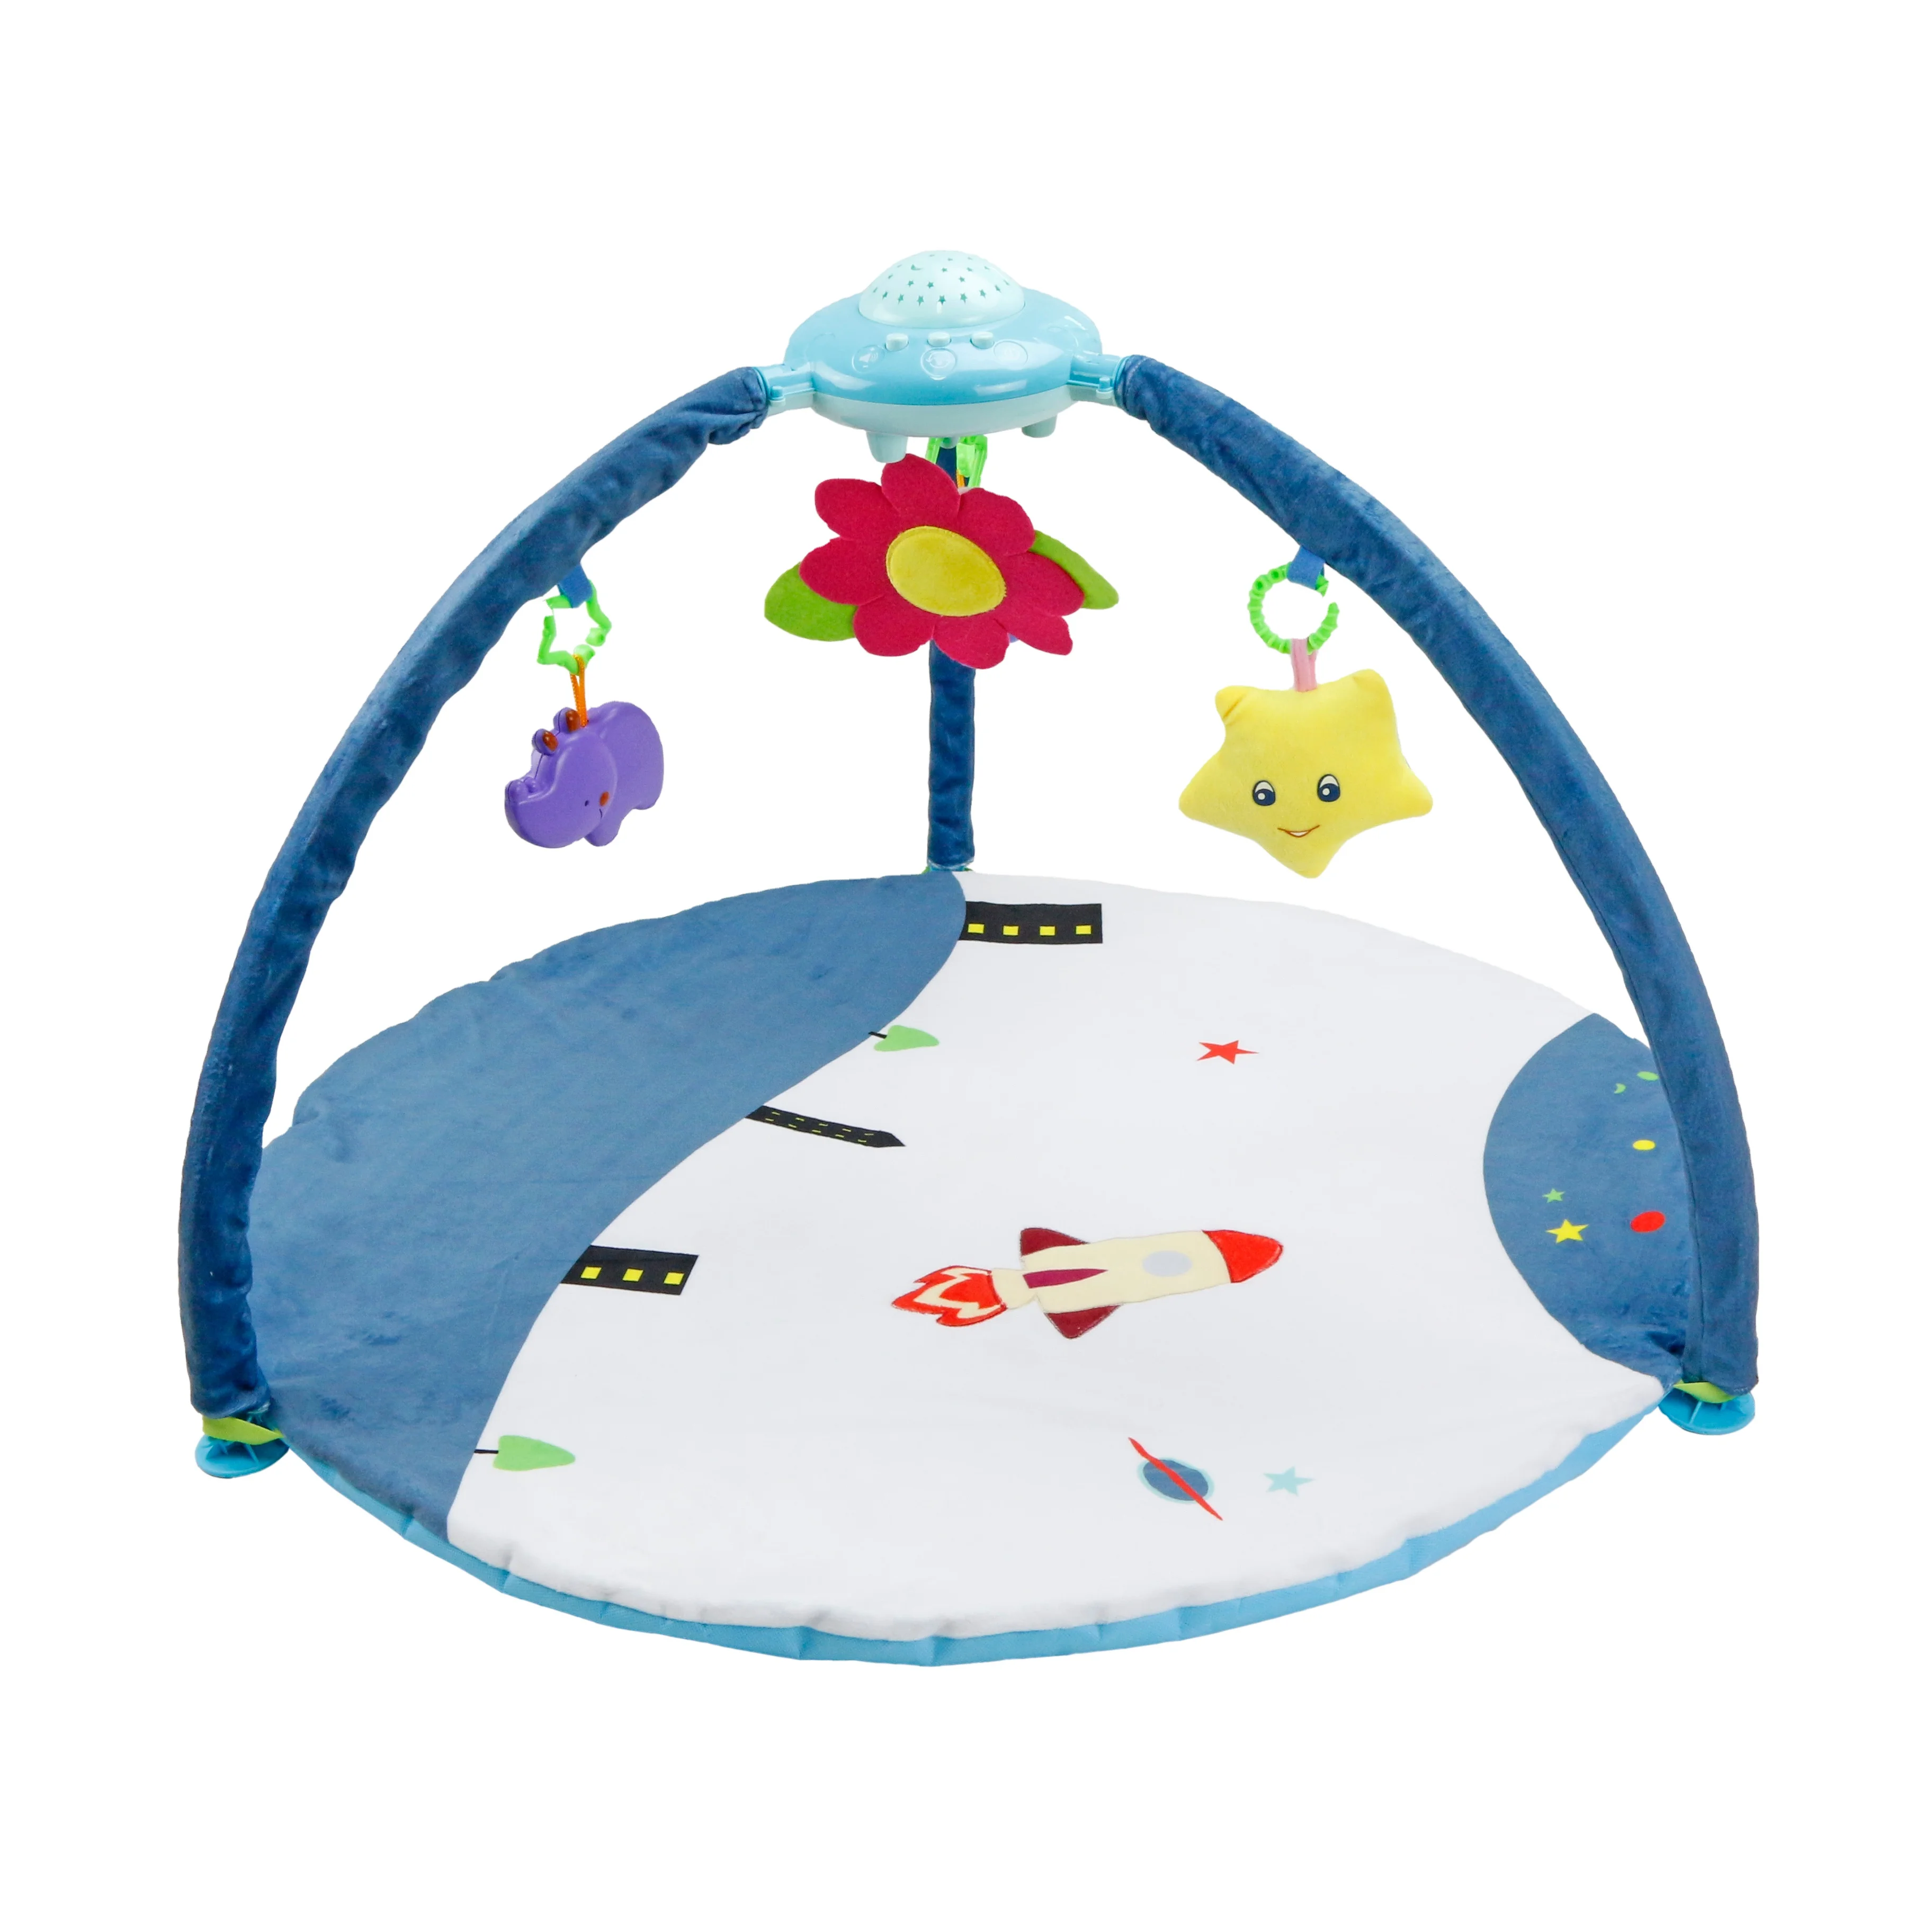 Wholesale Baby Musical Indoor Soft Carpet Activity Large Jungle Gym Play Gym Mats With Projector